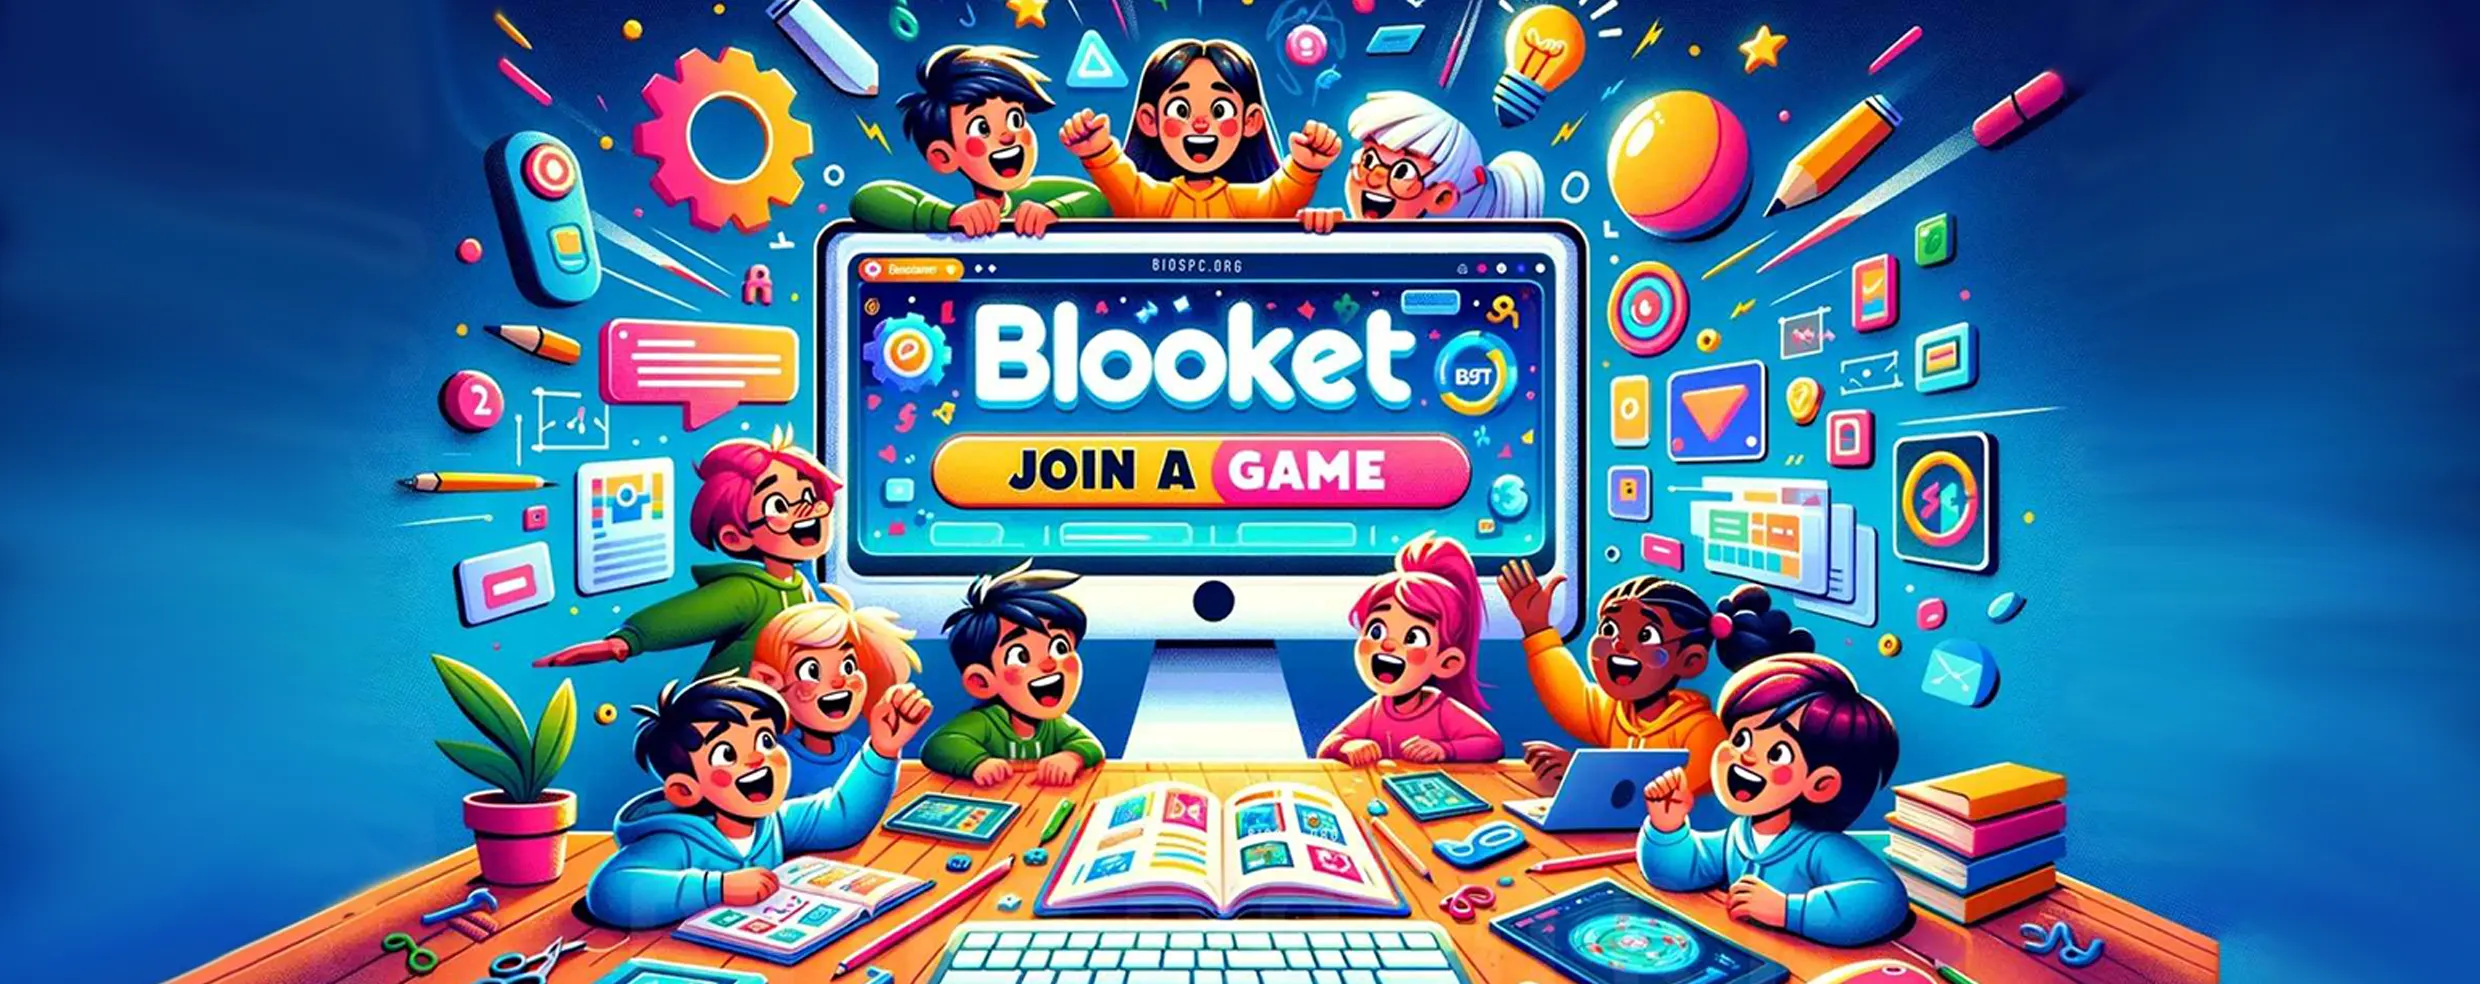 Who Can Join Blooket2